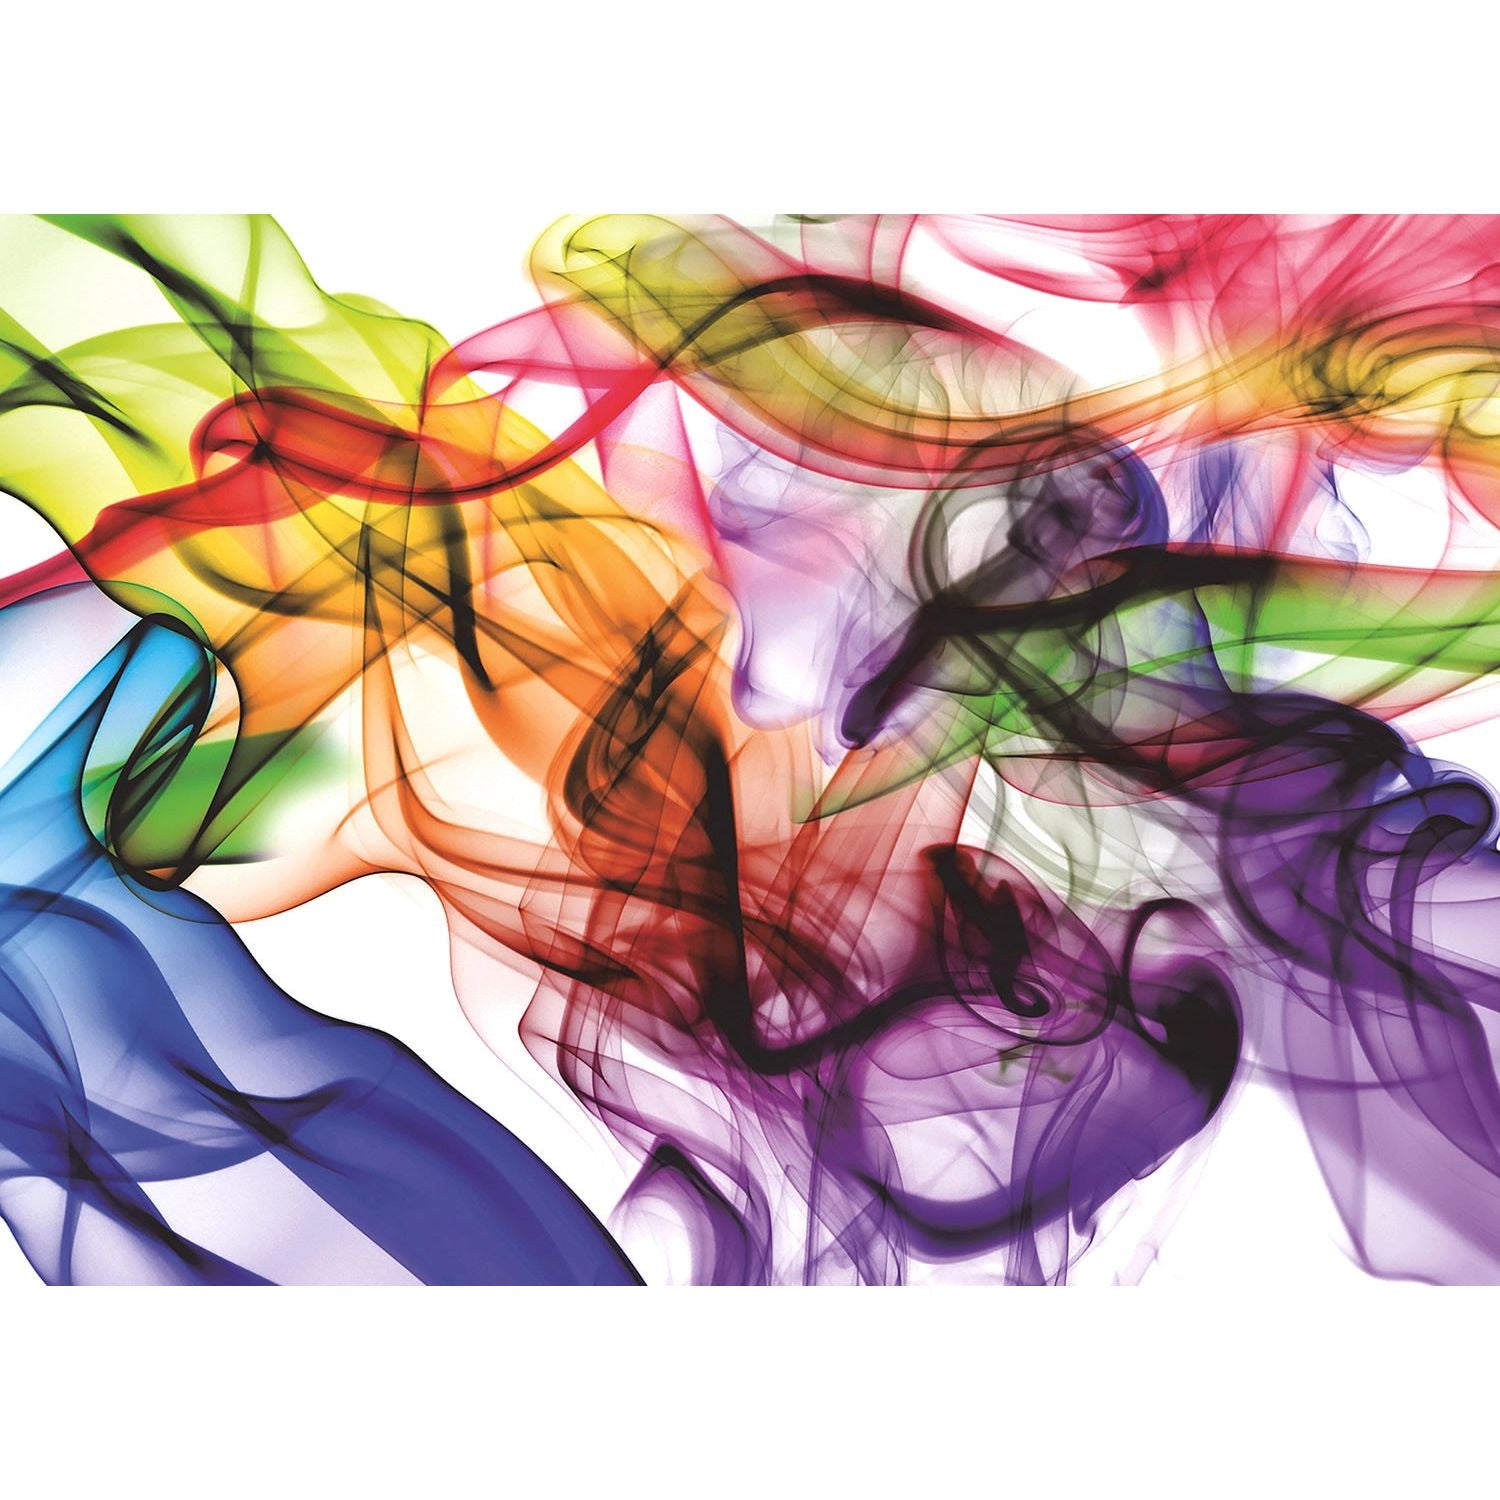 Dance of Colors Wall Mural: Ignite Your Space with Vibrant Abstraction